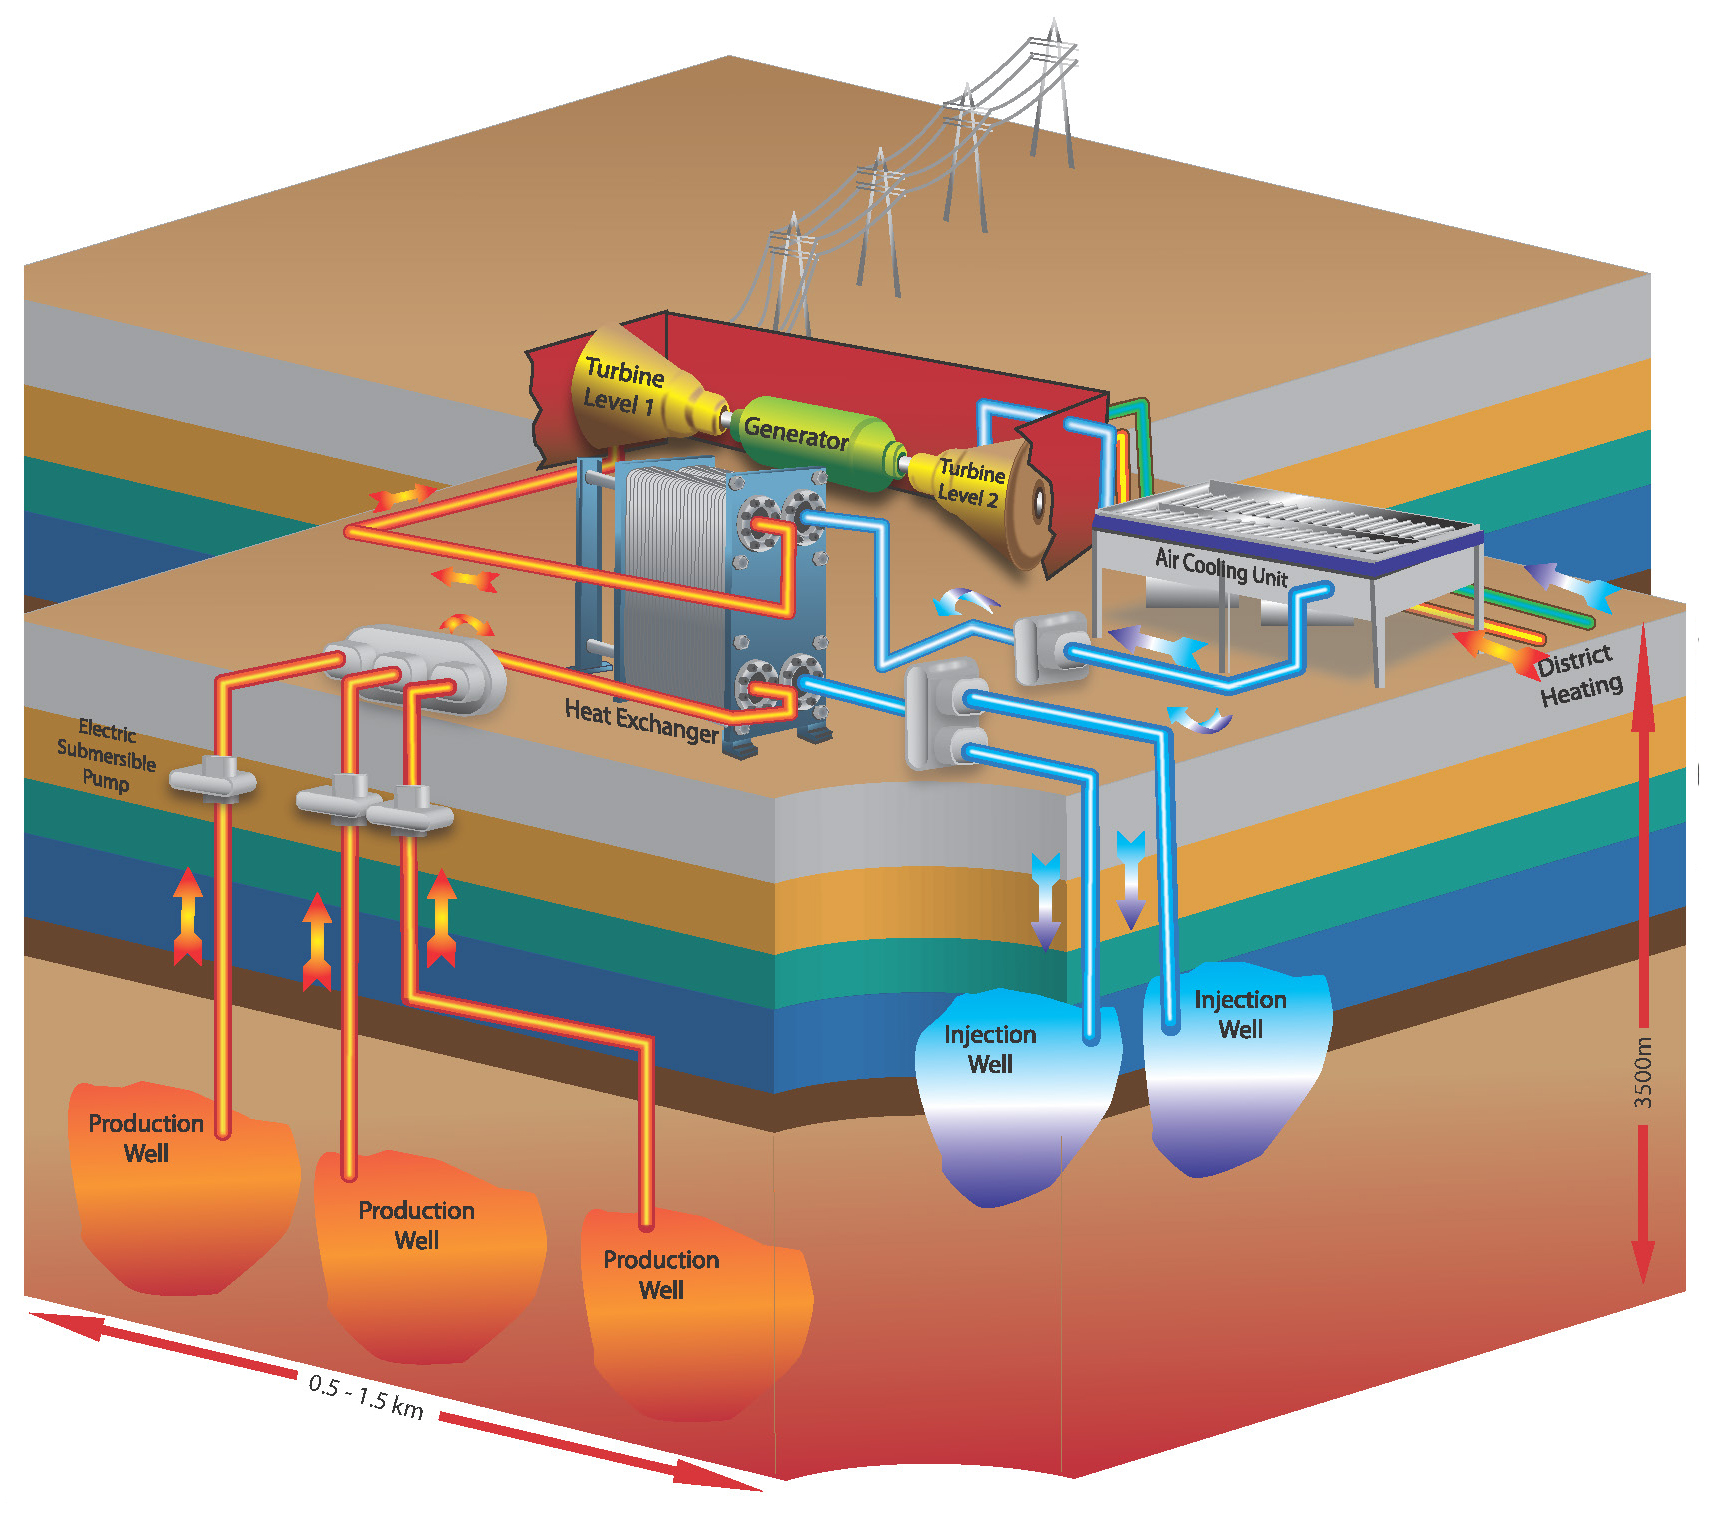 Geothermal energy | Description, Uses, History, & Pros and Cons | Britannica